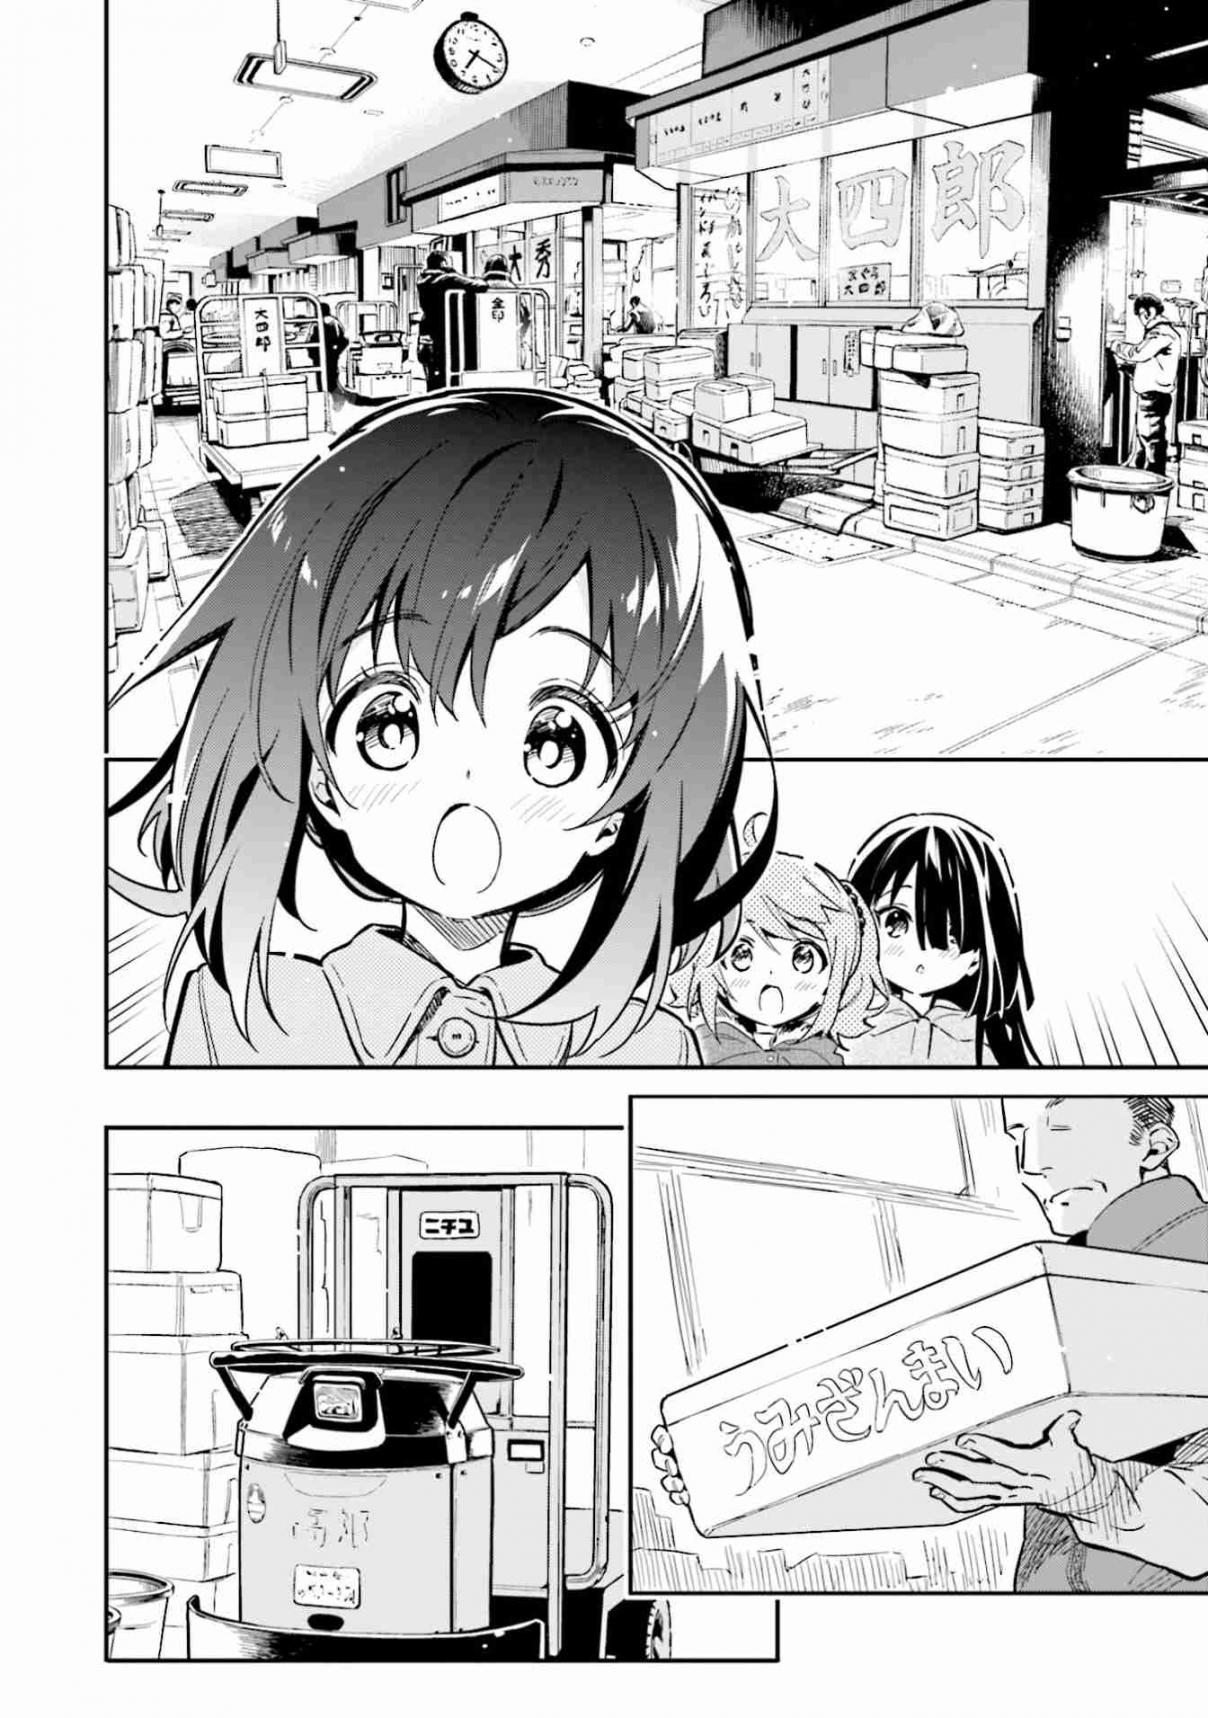 Chotto Ippai! Vol. 5 Ch. 33 The first time at the market